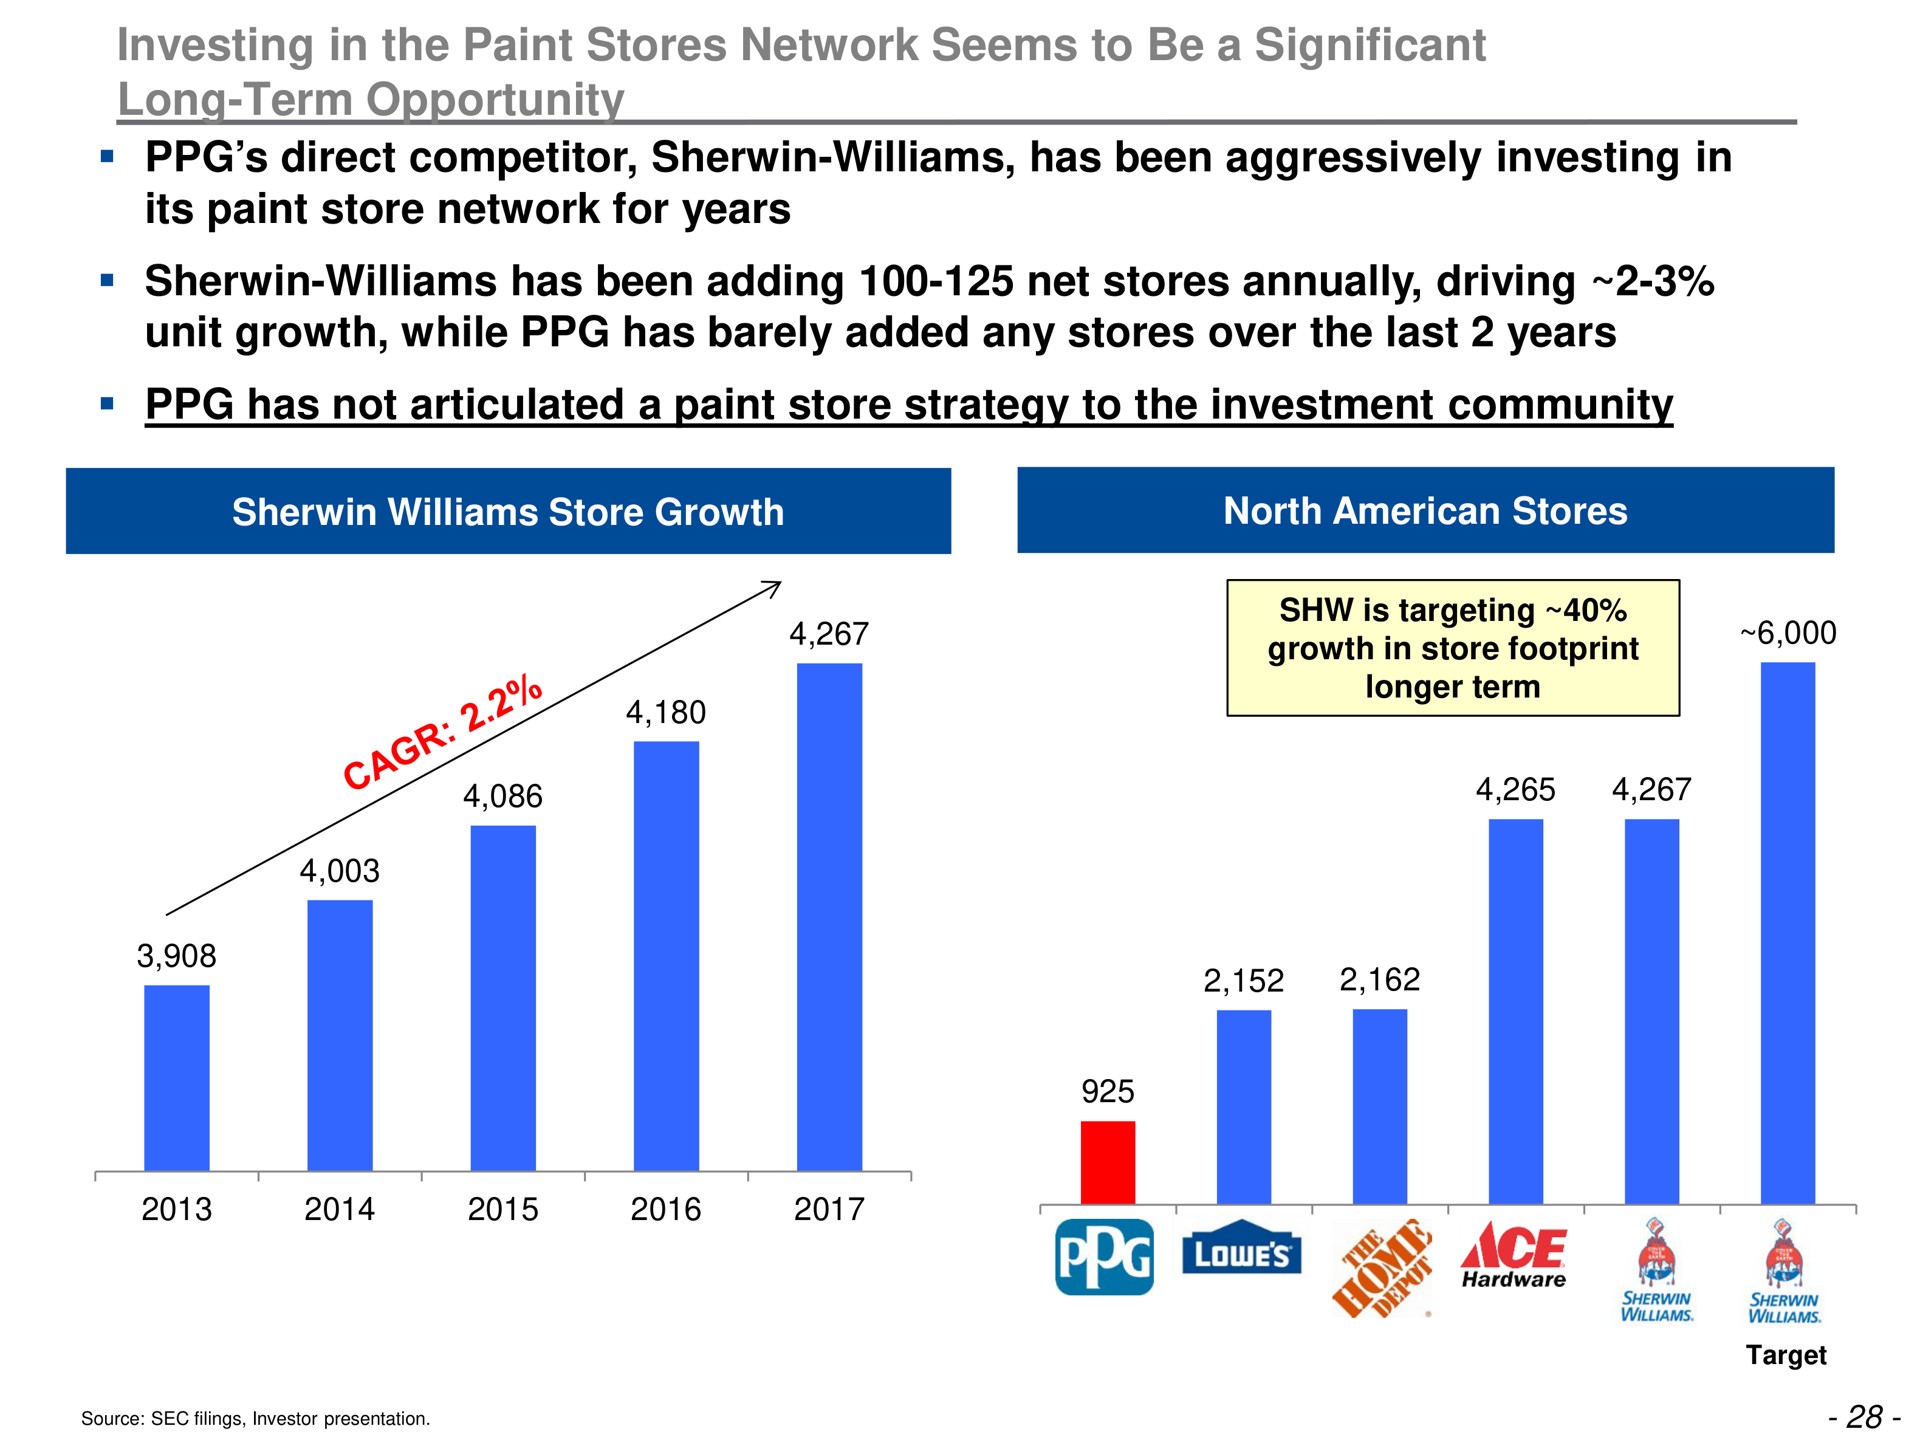 investing in the paint stores network seems to be a significant long term opportunity direct competitor has been aggressively investing in its paint store network for years has been adding net stores annually driving unit growth while has barely added any stores over the last years has not articulated a paint store strategy to the investment community ace | Trian Partners